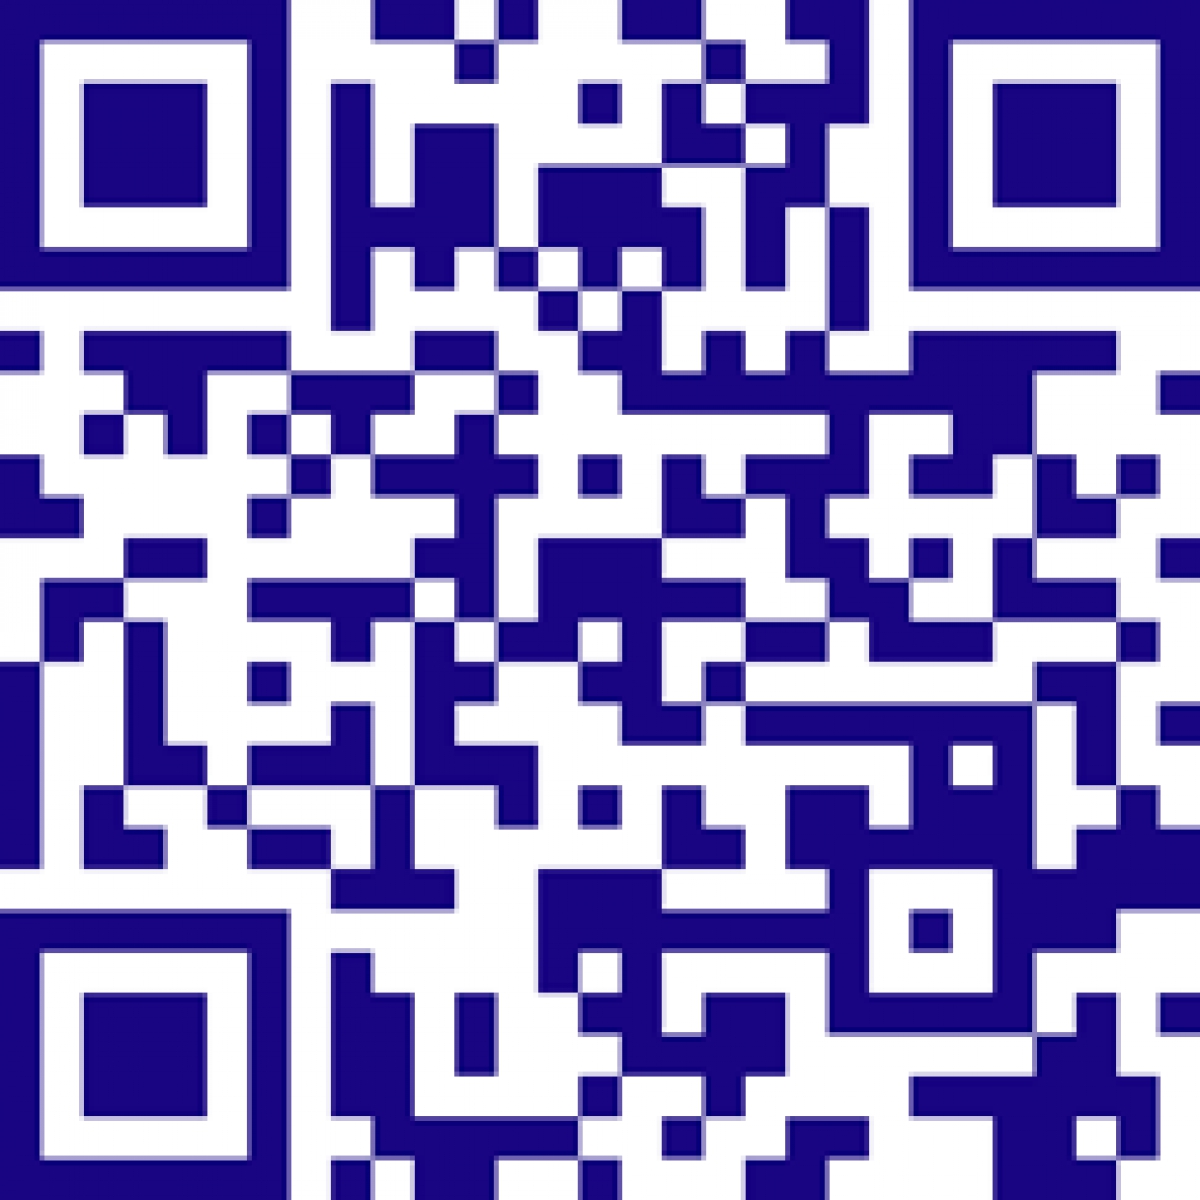 Scan the QR code to visit the PDL valves webpages